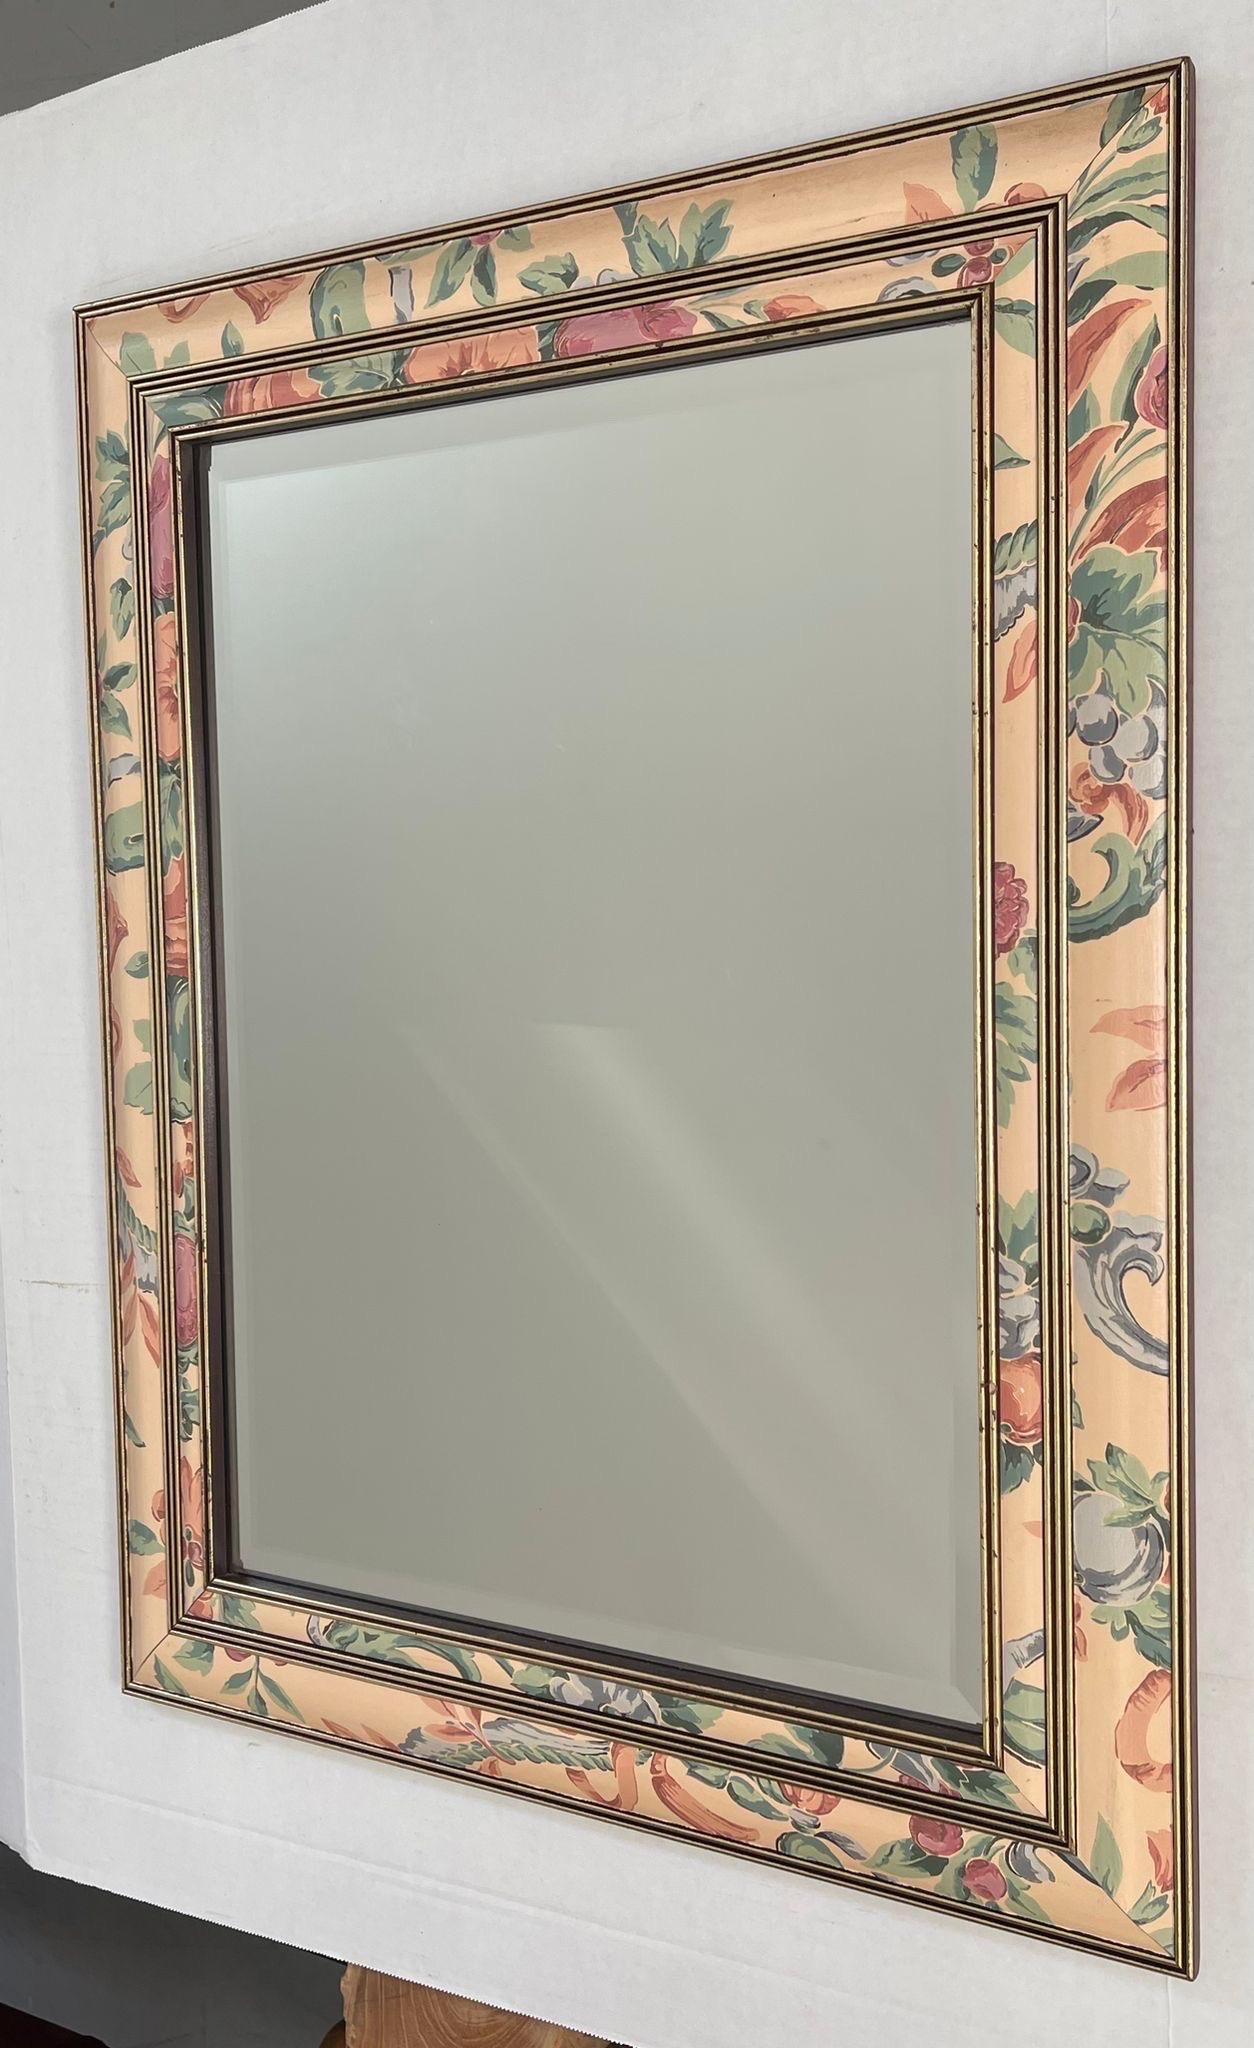 Vintage Beveled Mirror Framed with Gold Accents and Floral Print.Makers Mark on the Back States Canadian. Vintage Condition Consistent with Age as Pictured.

Dimensions. 21 W ; 3/4 D ; 27 H